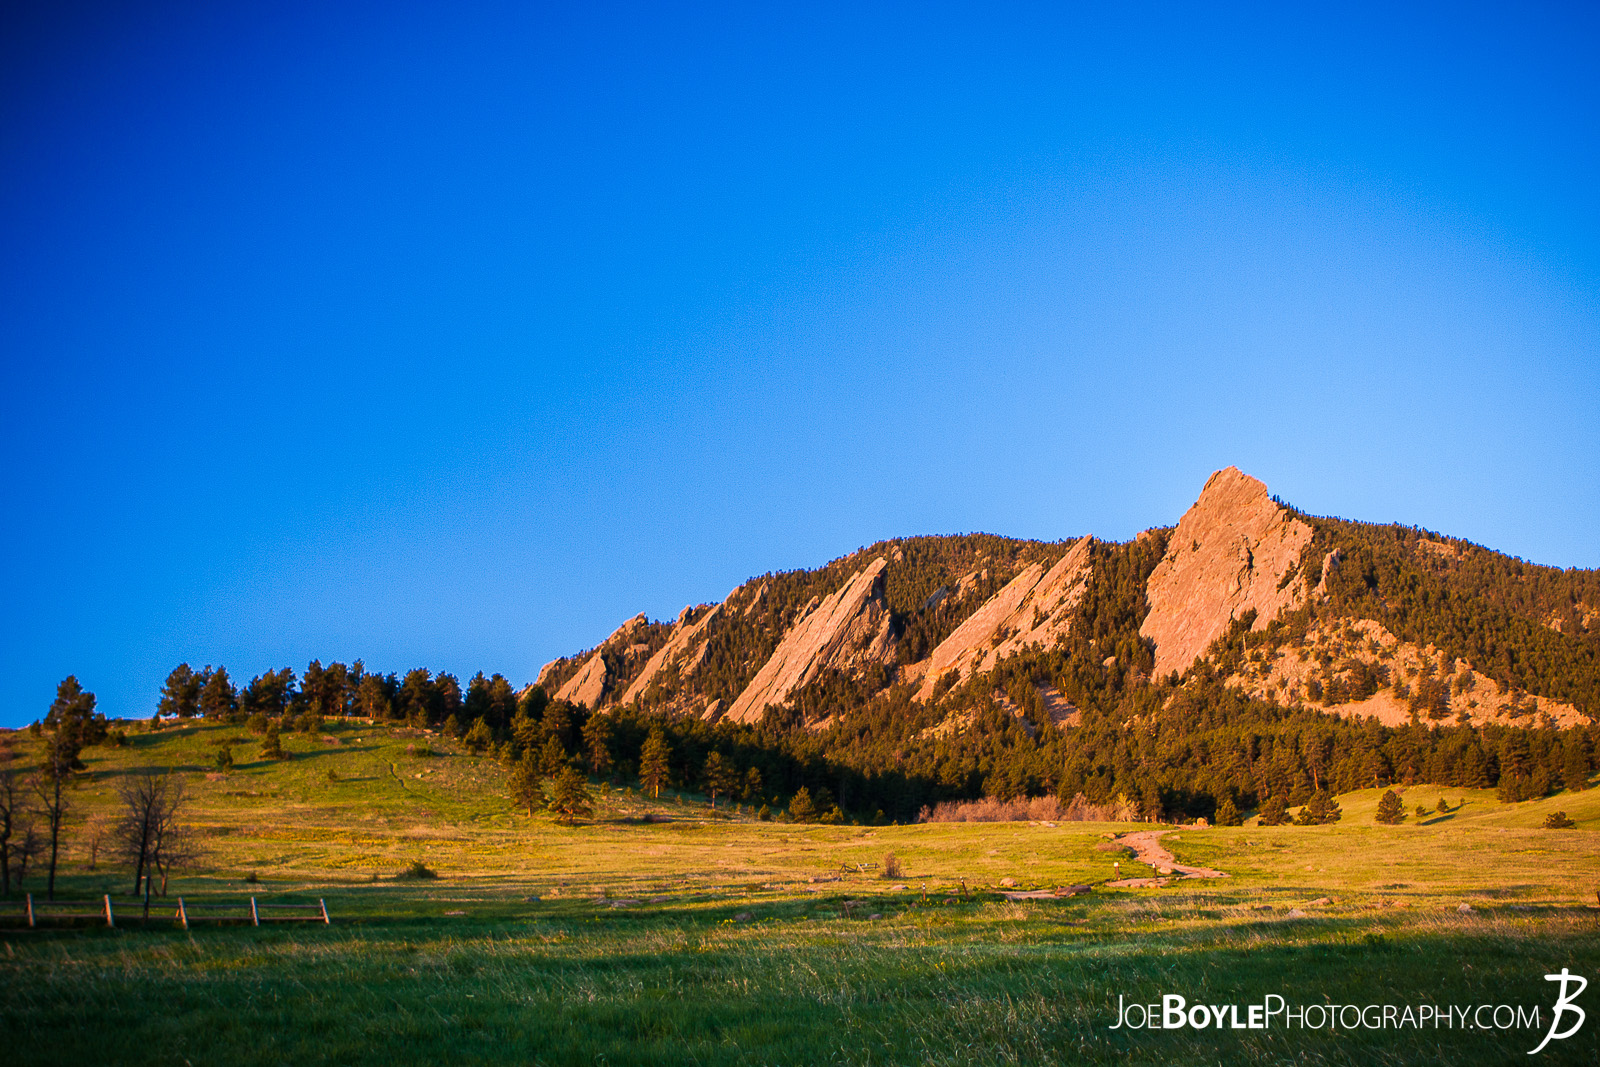  I made a stop over to Boulder, Colorado to check out the flatirons in Chautauqua State Park. I'm thankful there was a beautiful sunrise to draw the beauty out of the park and mountains! 